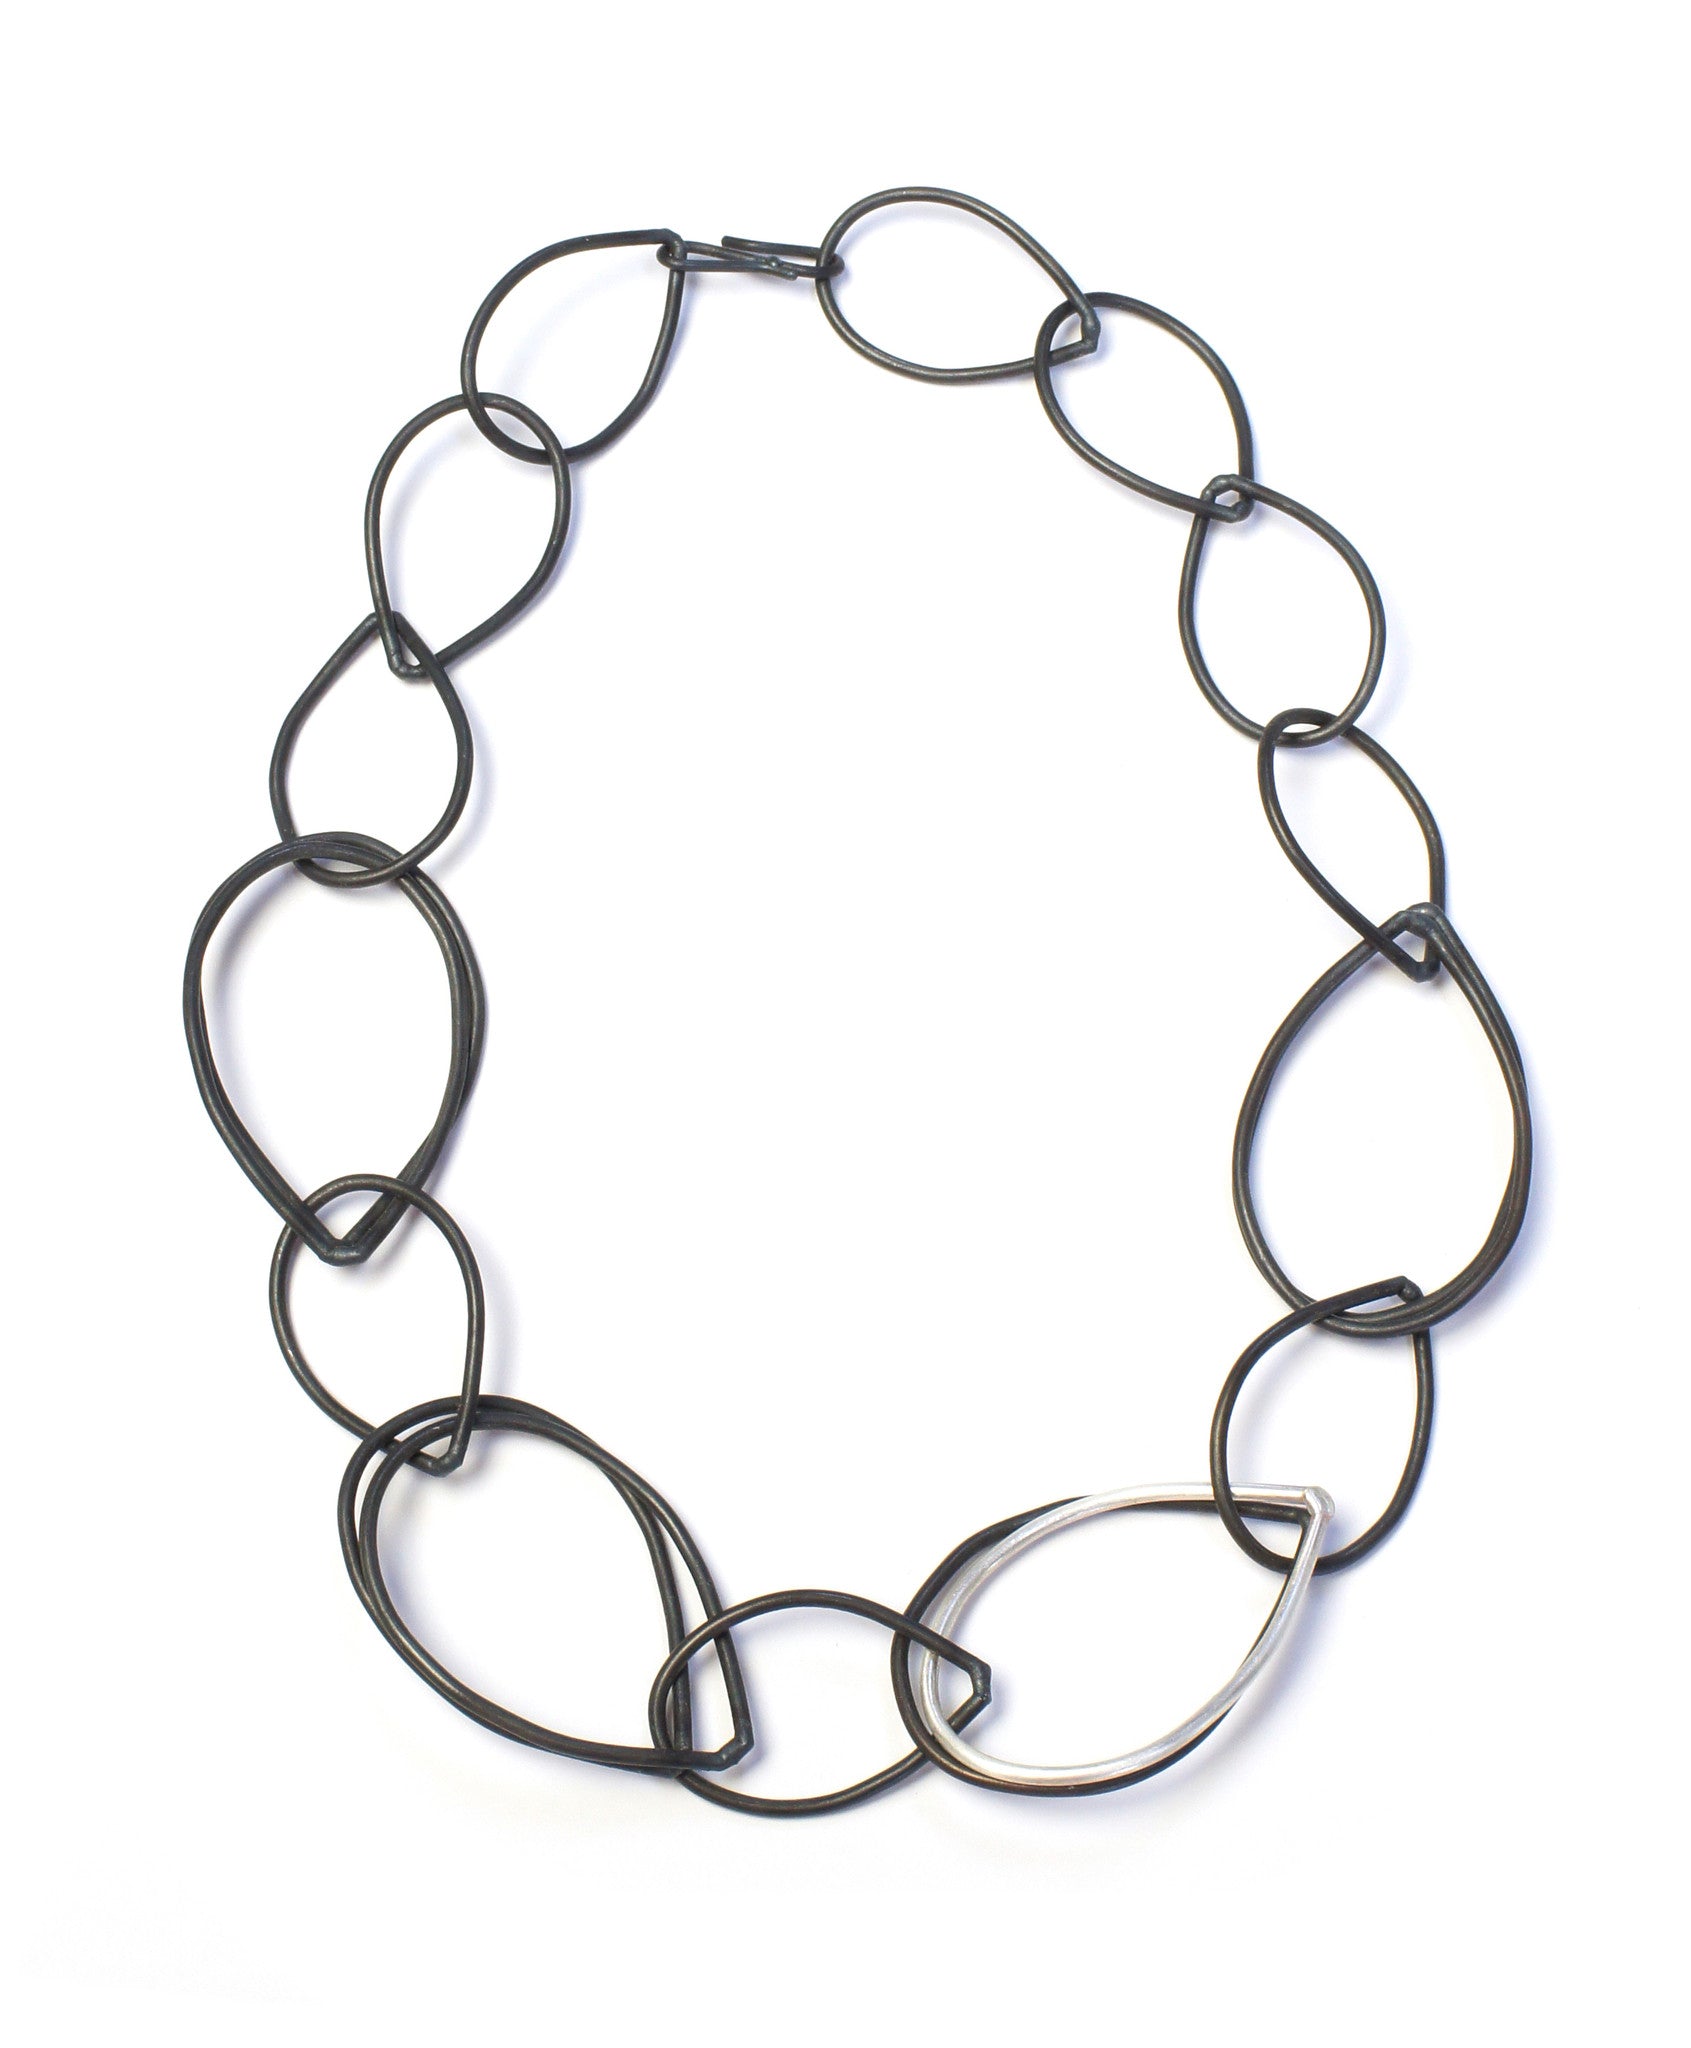 Amy necklace in steel and silver